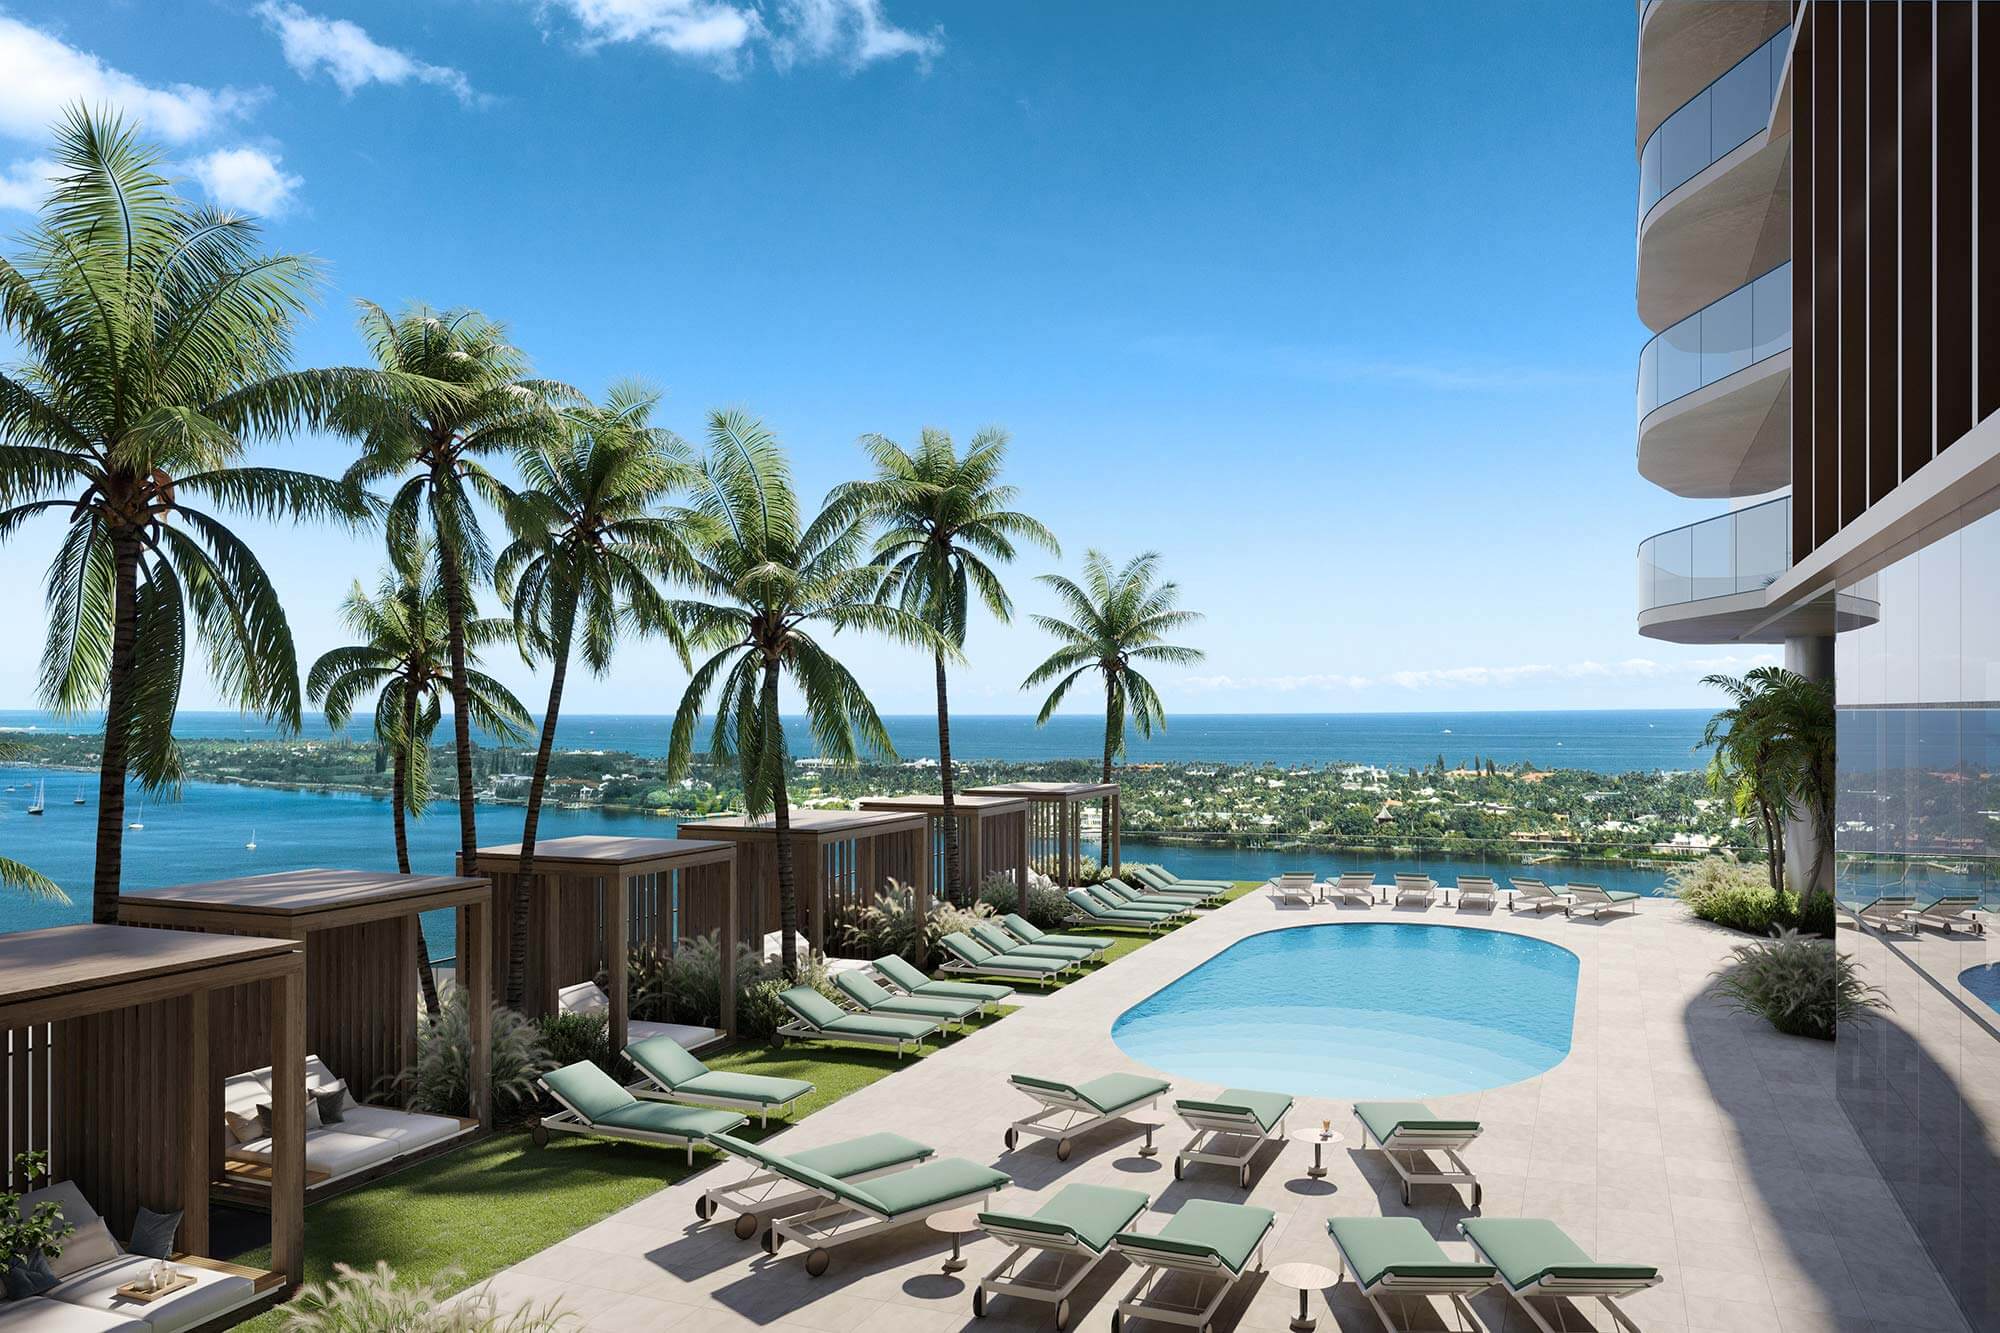 olara's private pool area with luxury chaise chairs and a view of intracostal